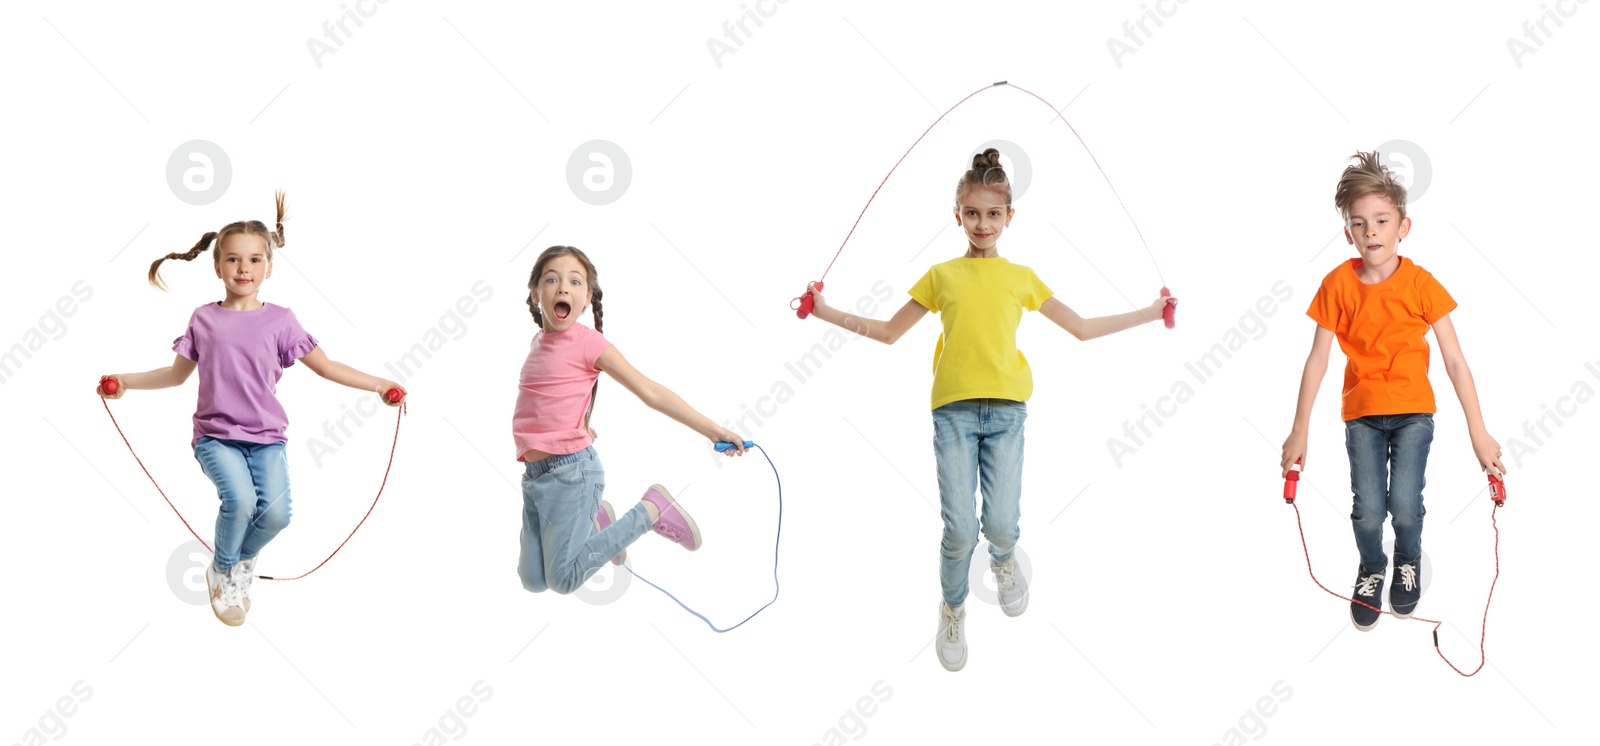 Image of Cute happy children with jumping ropes on white background, collage. Banner design